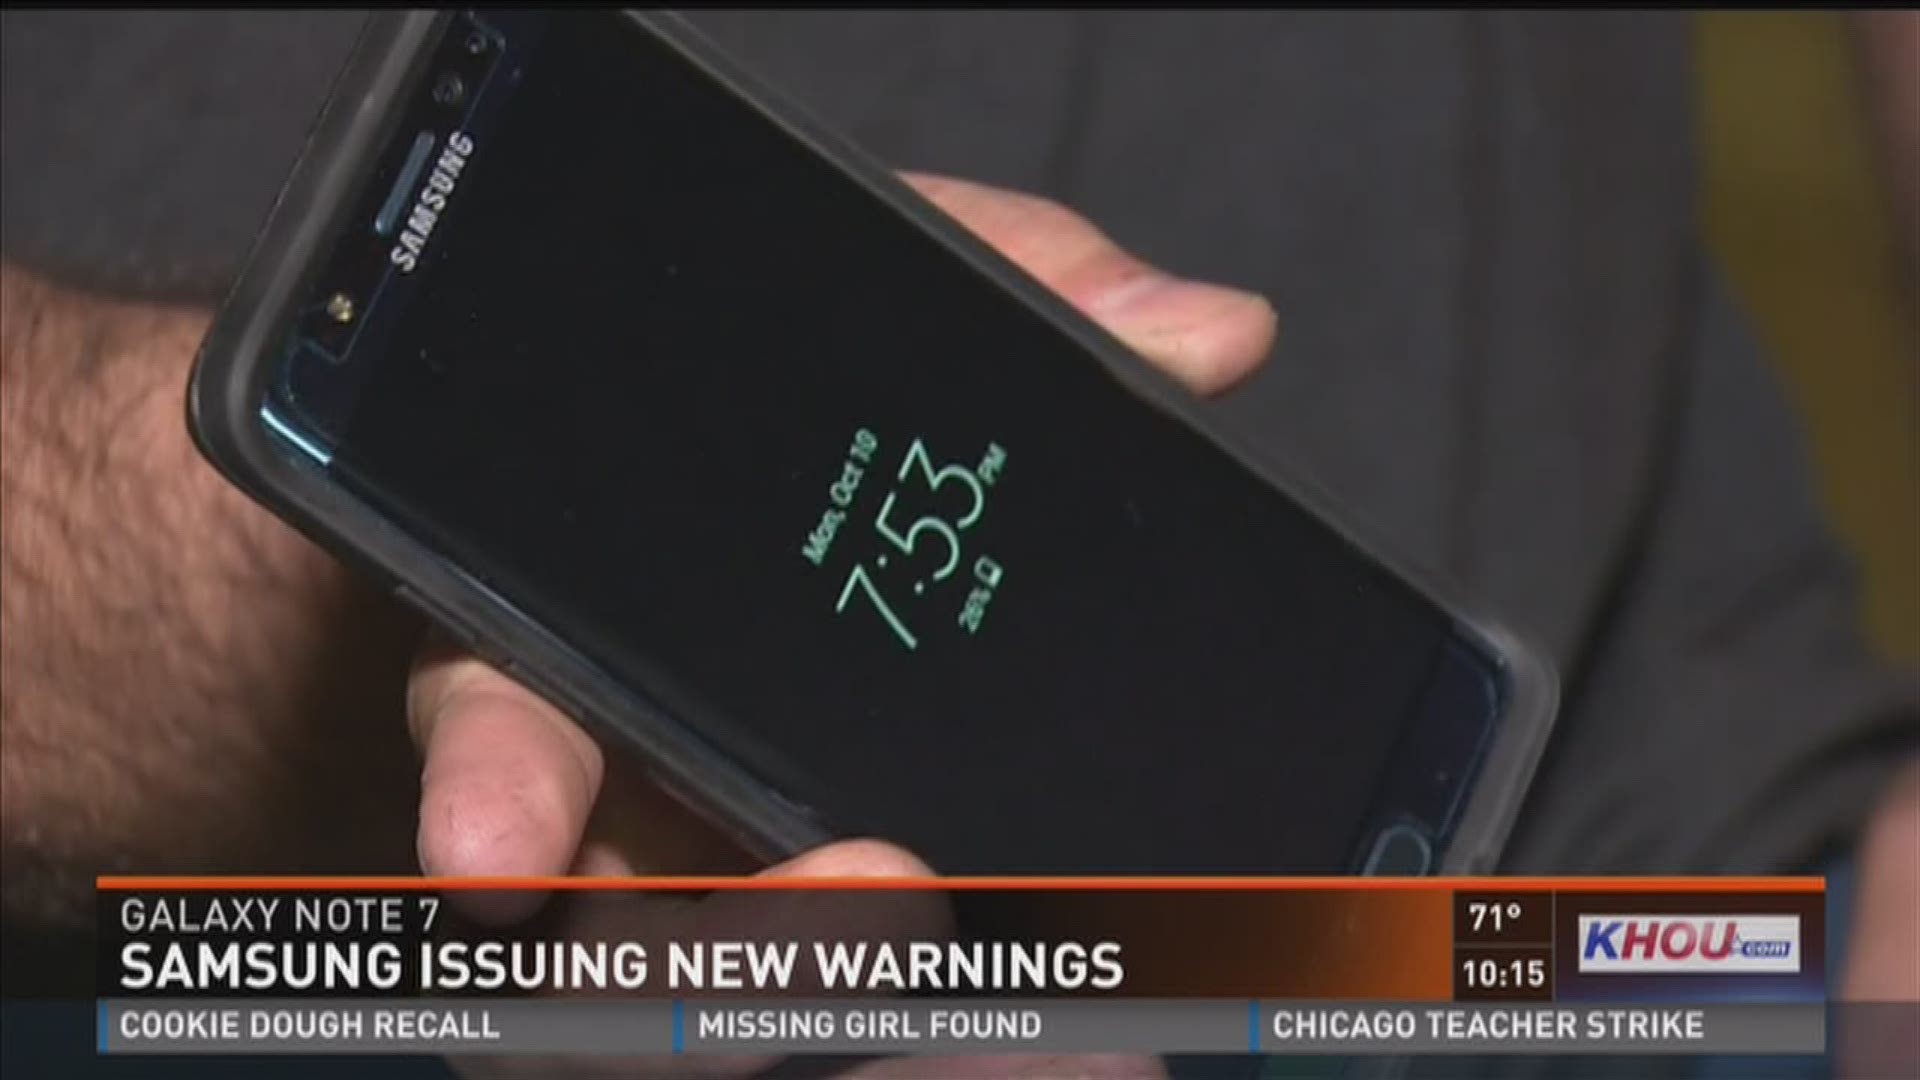 The Consumer Product Safety Commission warned Monday consumers should power down and stop using all Samsung Galaxy Note 7s.